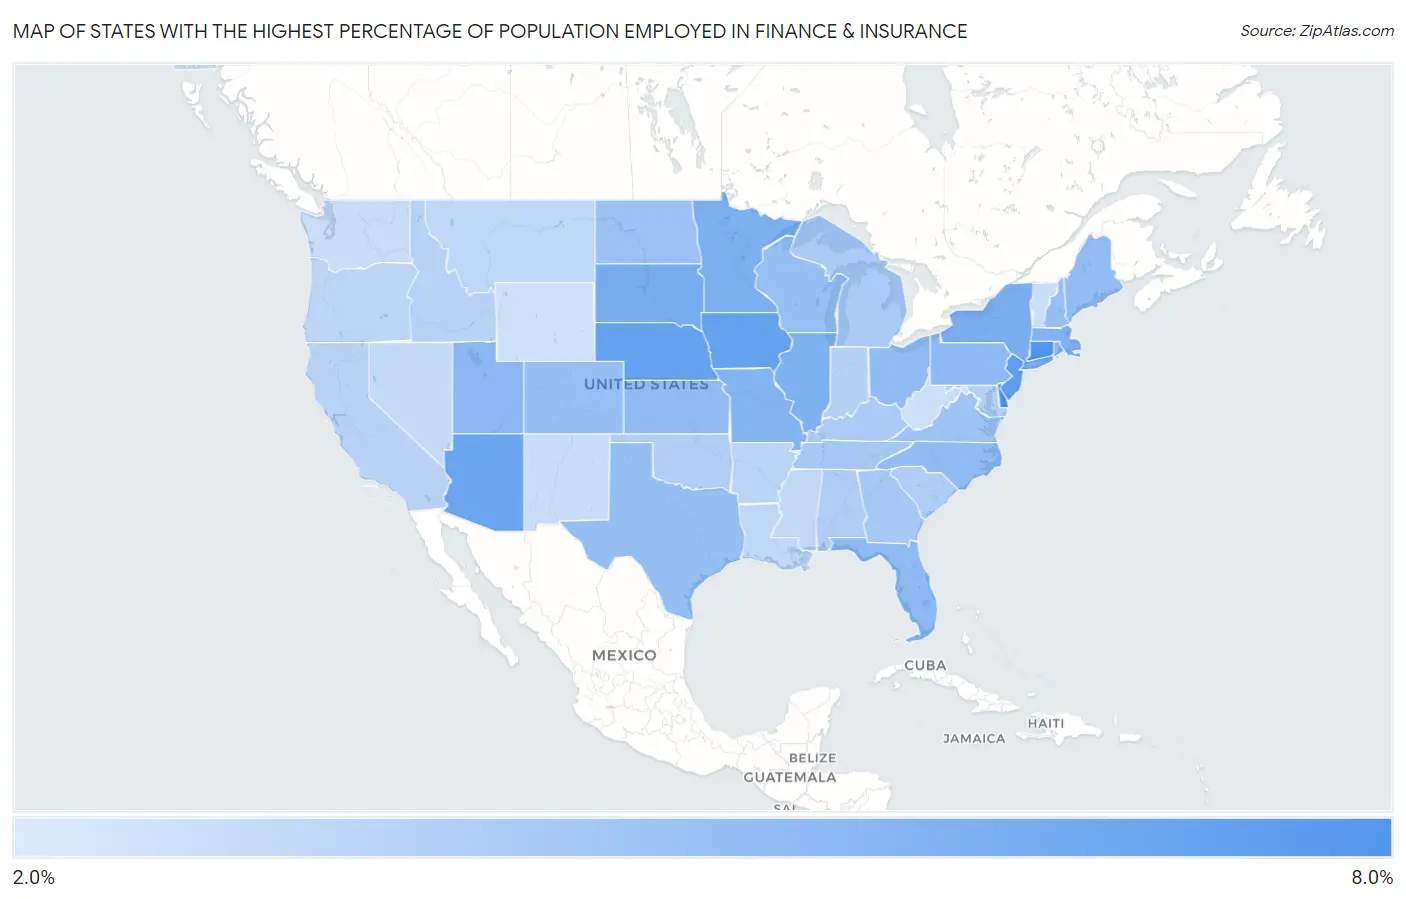 States with the Highest Percentage of Population Employed in Finance & Insurance in the United States Map